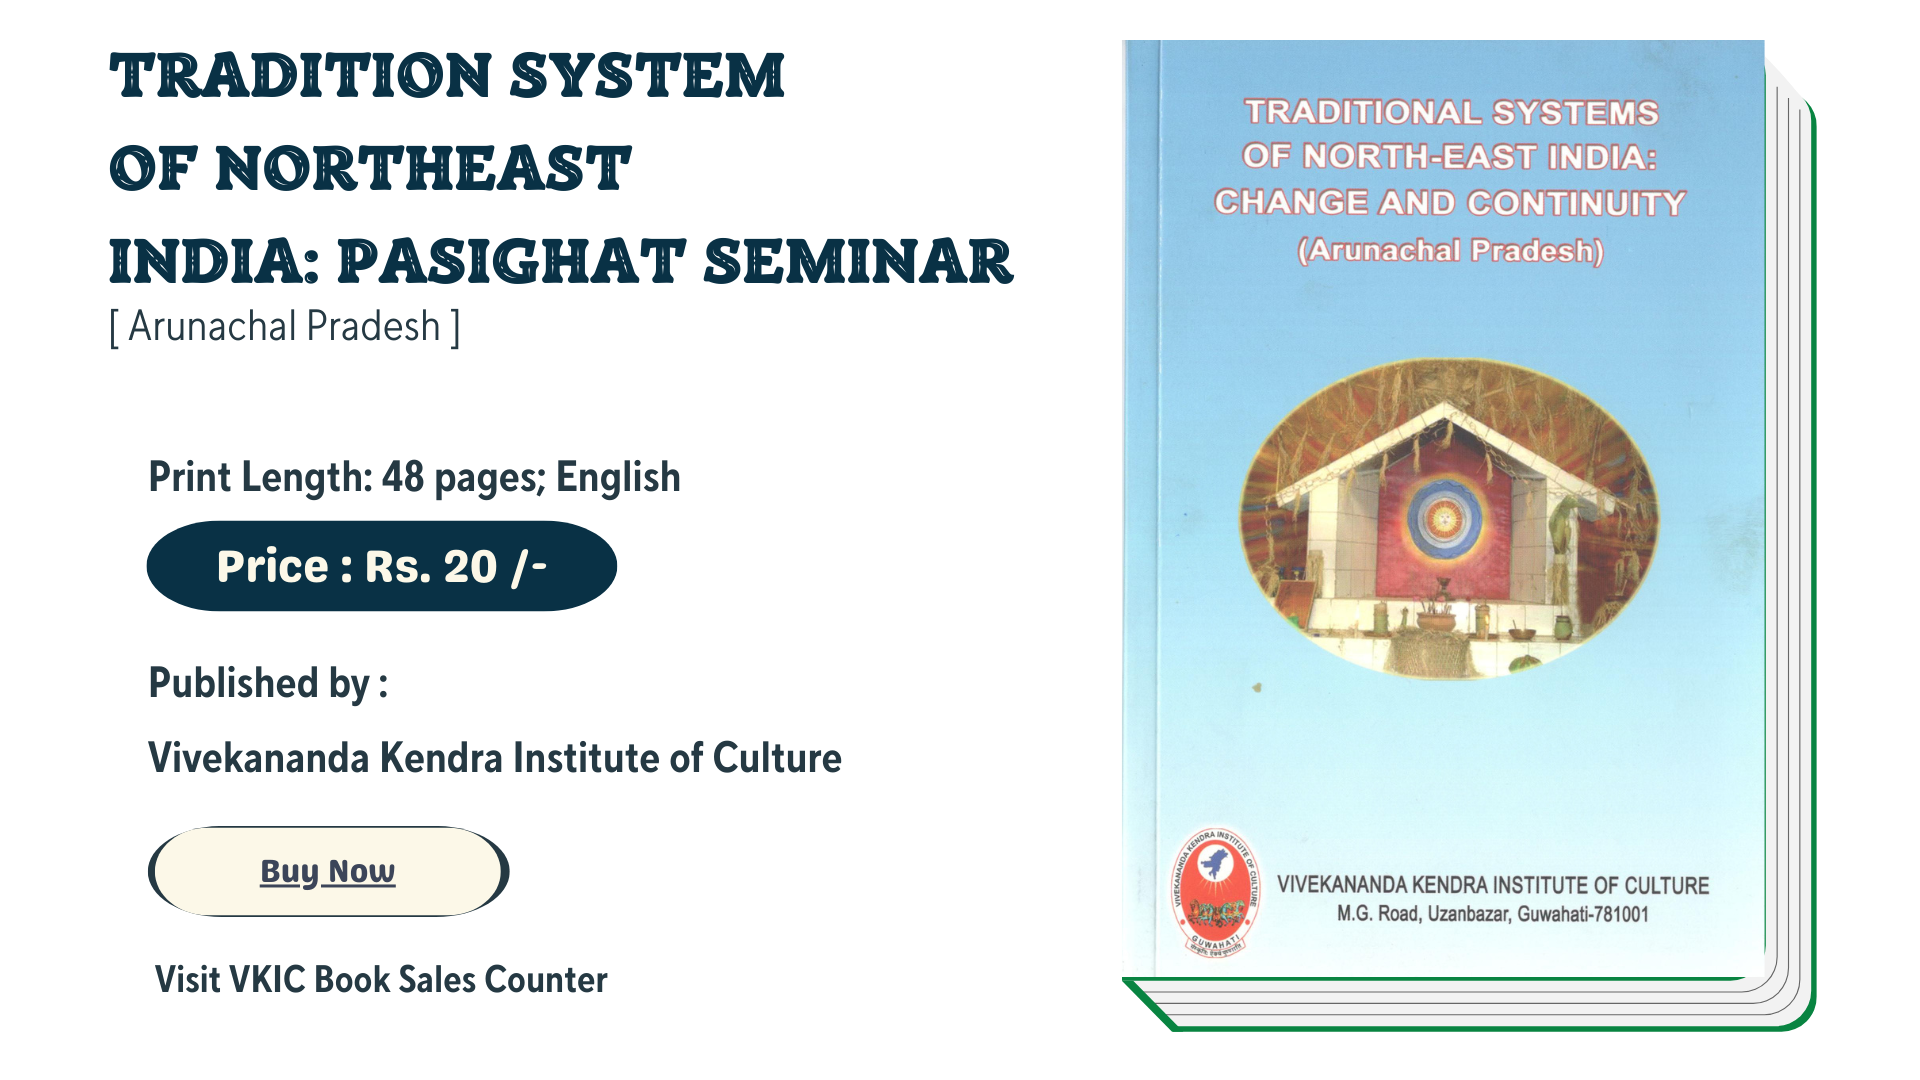 Tradition System of Northeast India: Pasighat Seminar